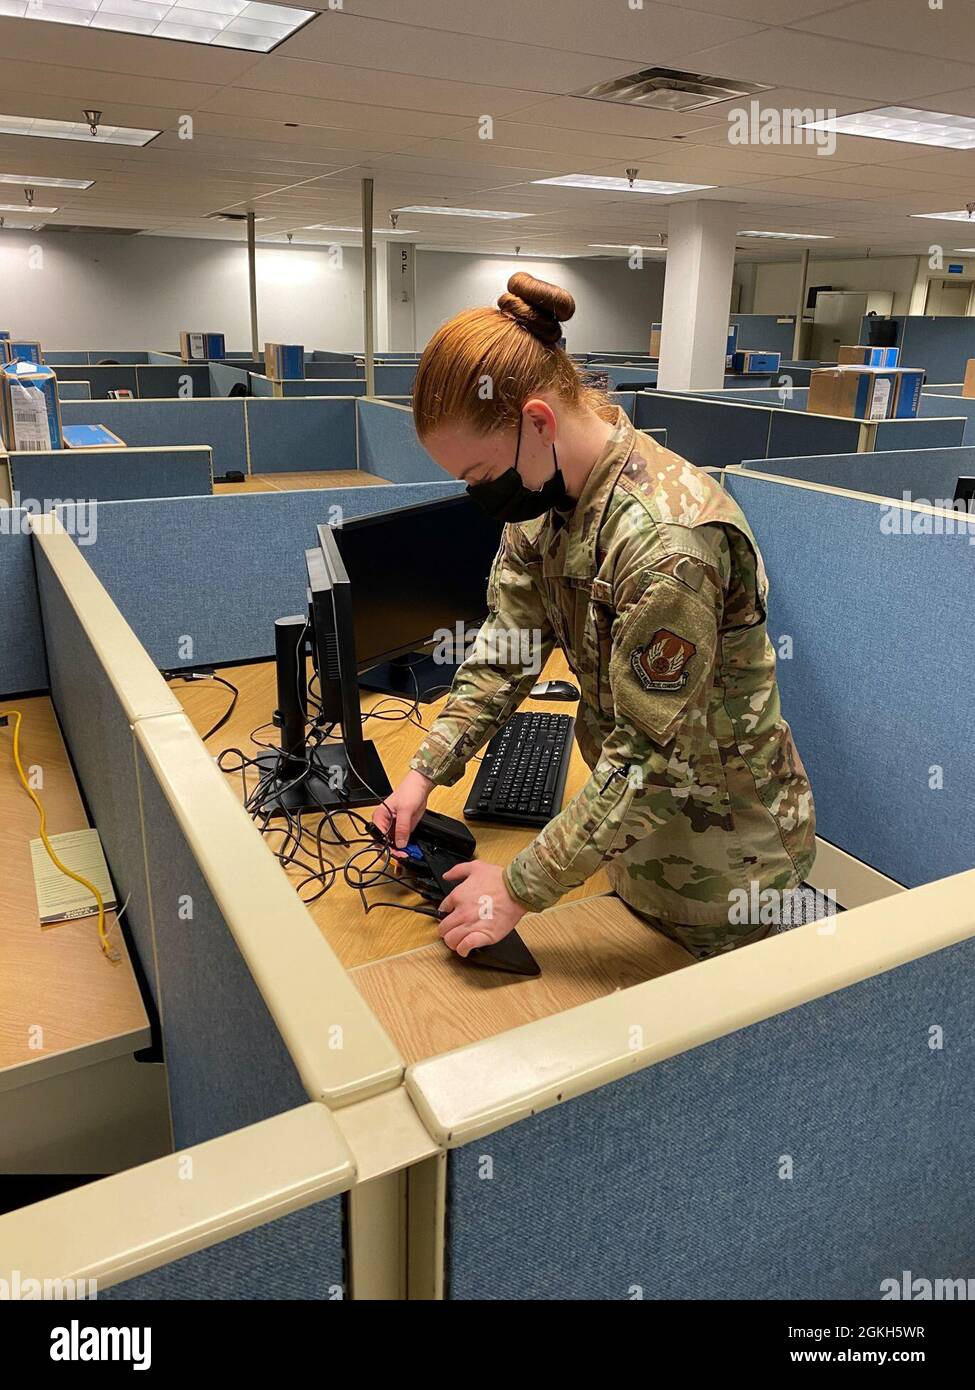 Staff Sgt. Elda Quesenberry connects a new computer work station in preparation for the transitional wave of office moves required by the future renovation of Headquarters AFMC, Bldg. 262/266. Stock Photo